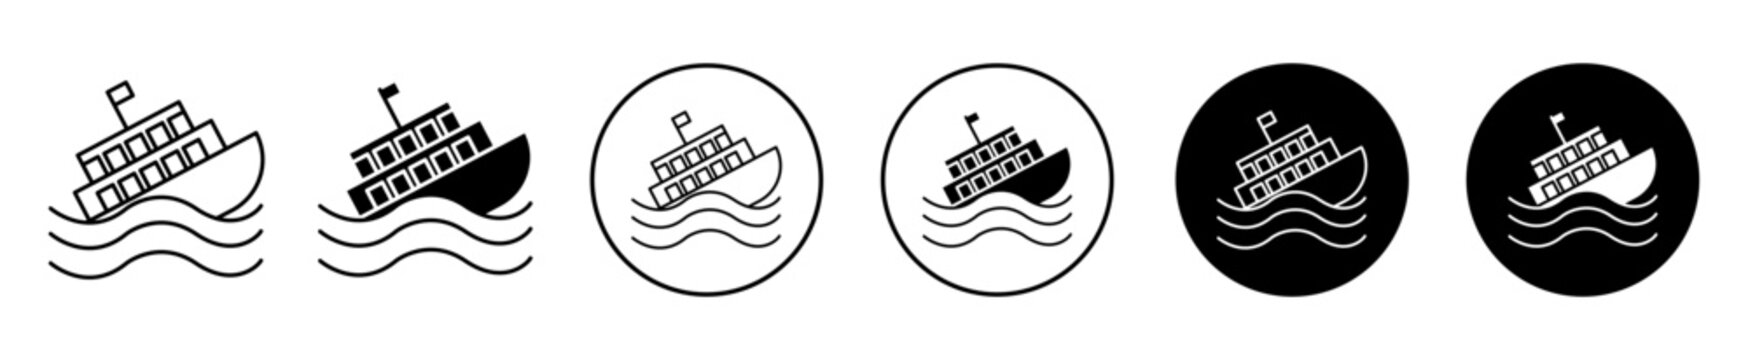 sinking icon sign set in outline style graphics design